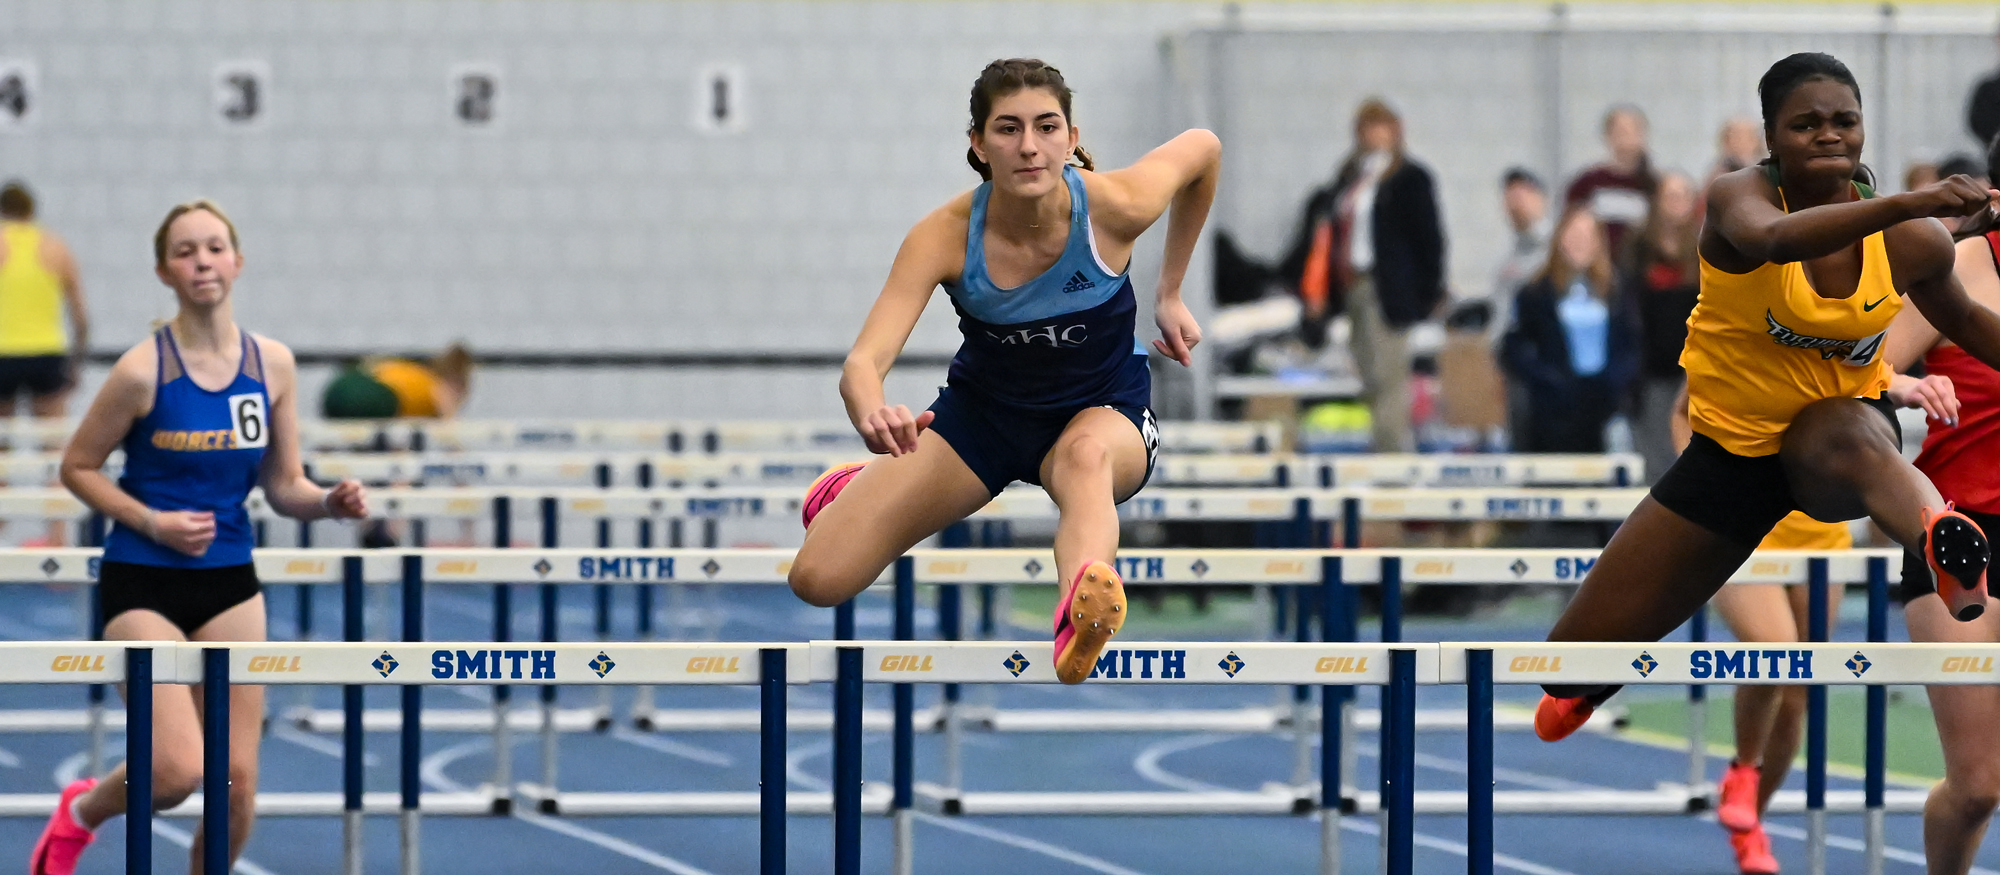 Ioanna Tsoni broke Mount Holyoke's team record in the 60-meter hurdles with a preilminary heat time of 9.17 seconds on Jan. 20, 2024 at Tufts University. (RJB Sports file photo)